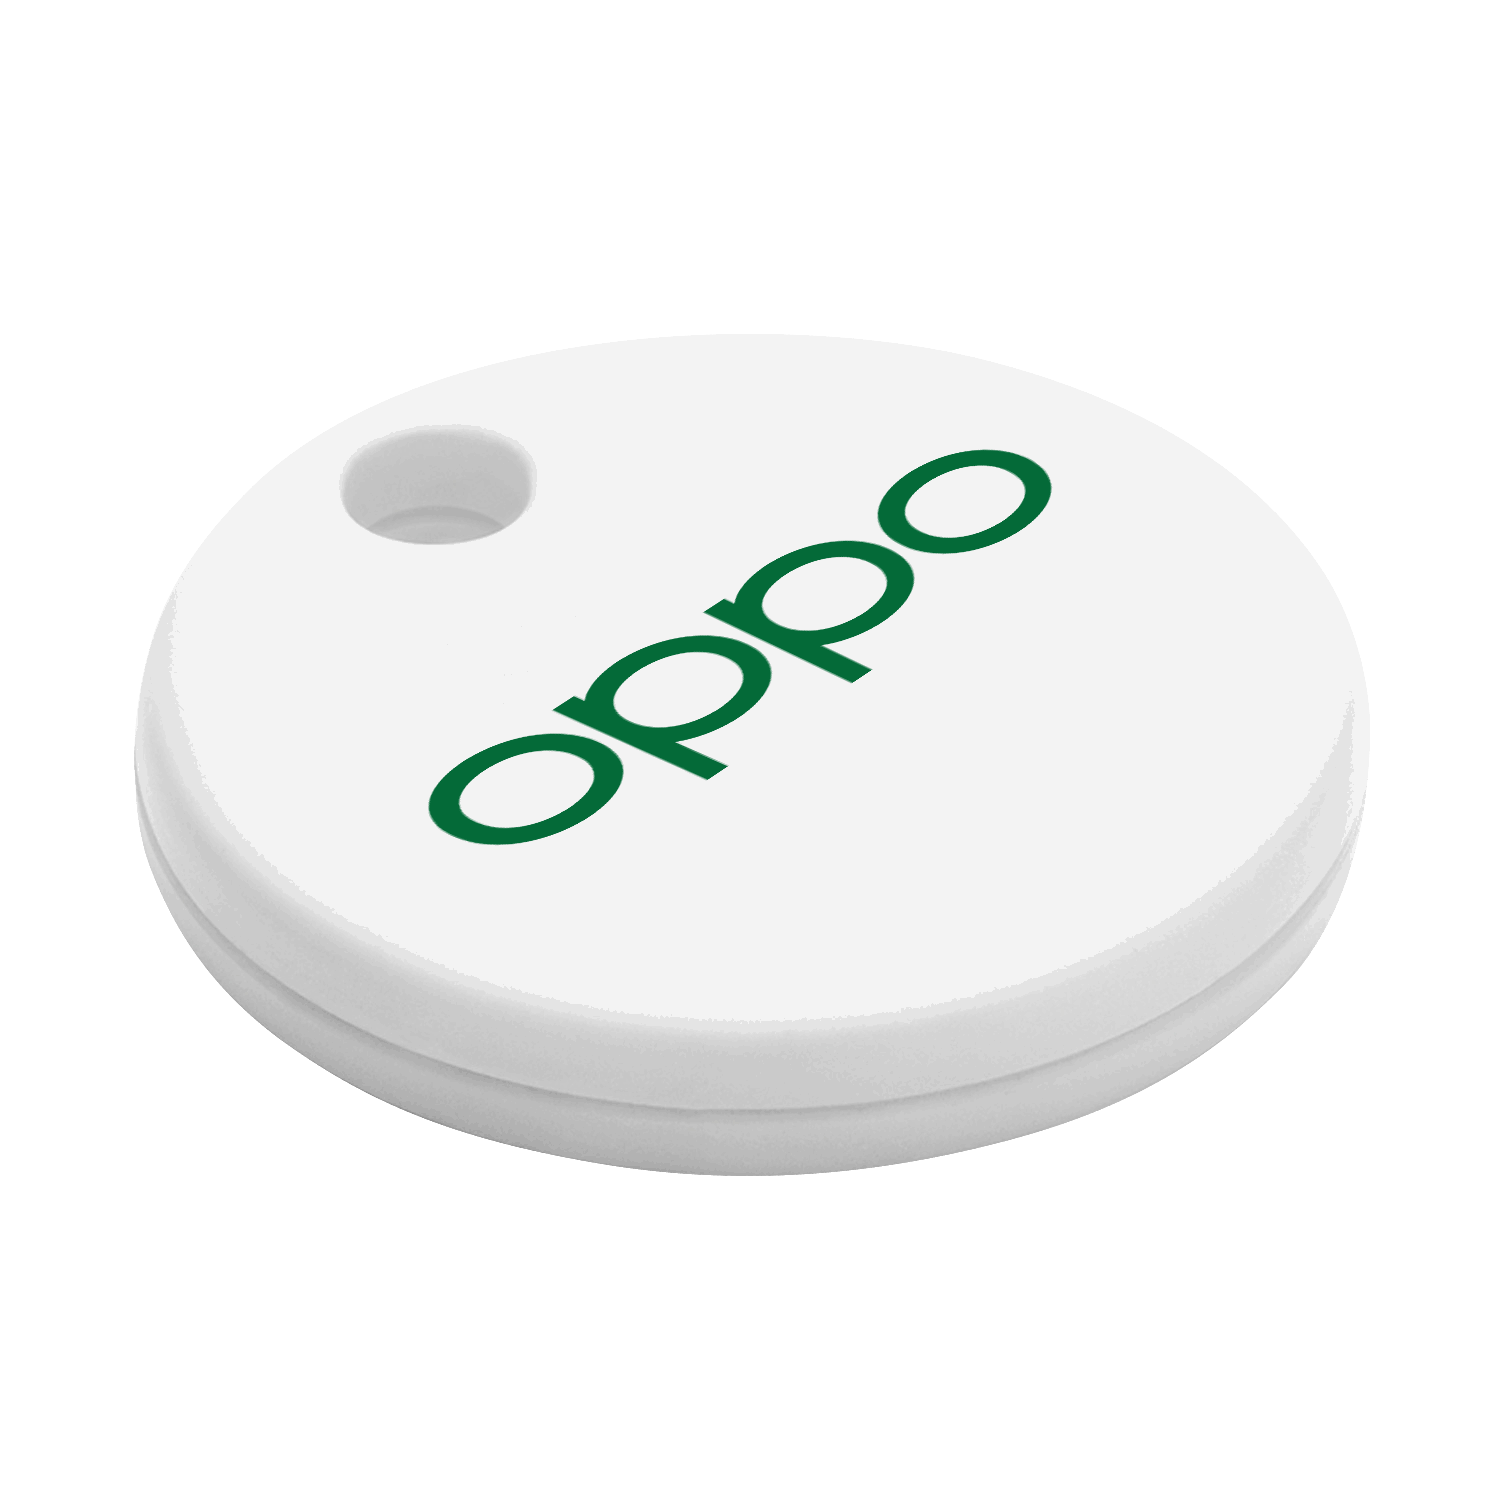 Chipolo ONE - OPPO Branded